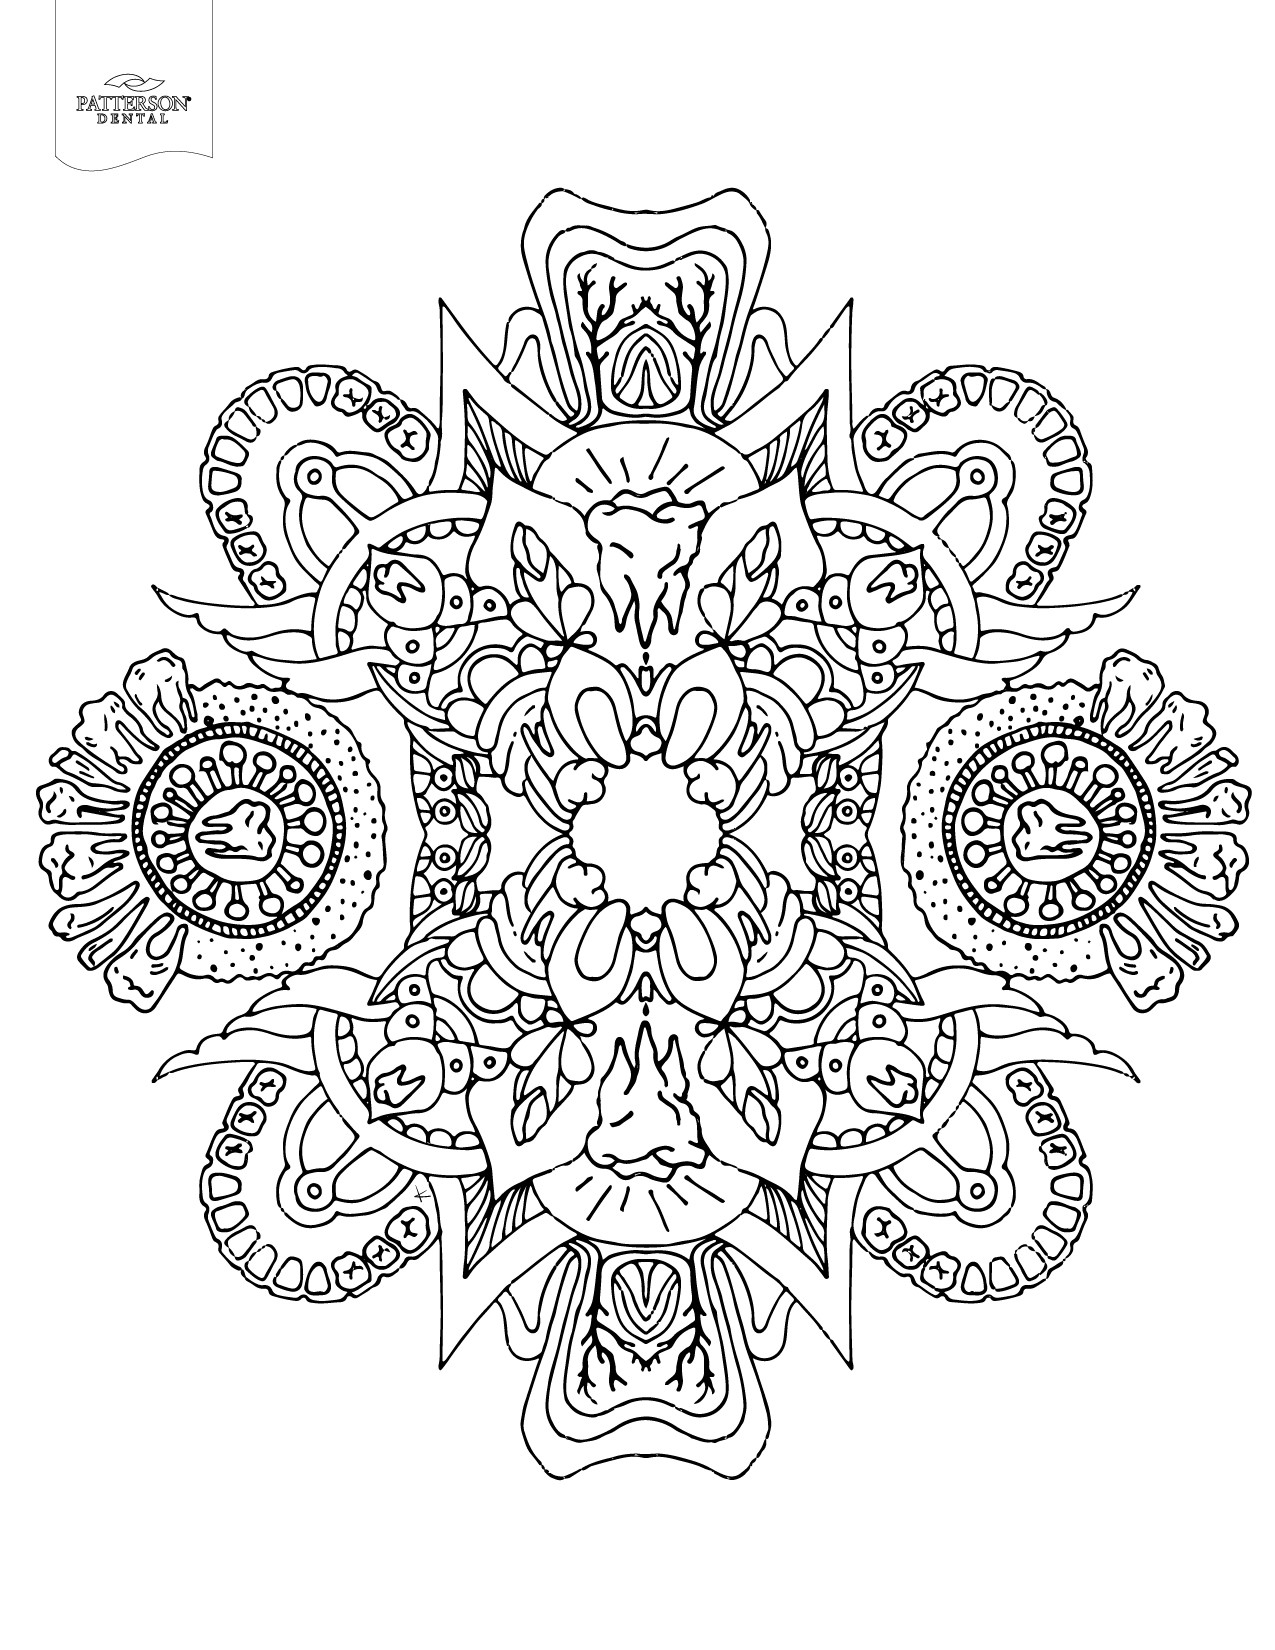 Coloring Sheets For Adults Printable
 10 Toothy Adult Coloring Pages [Printable] f The Cusp